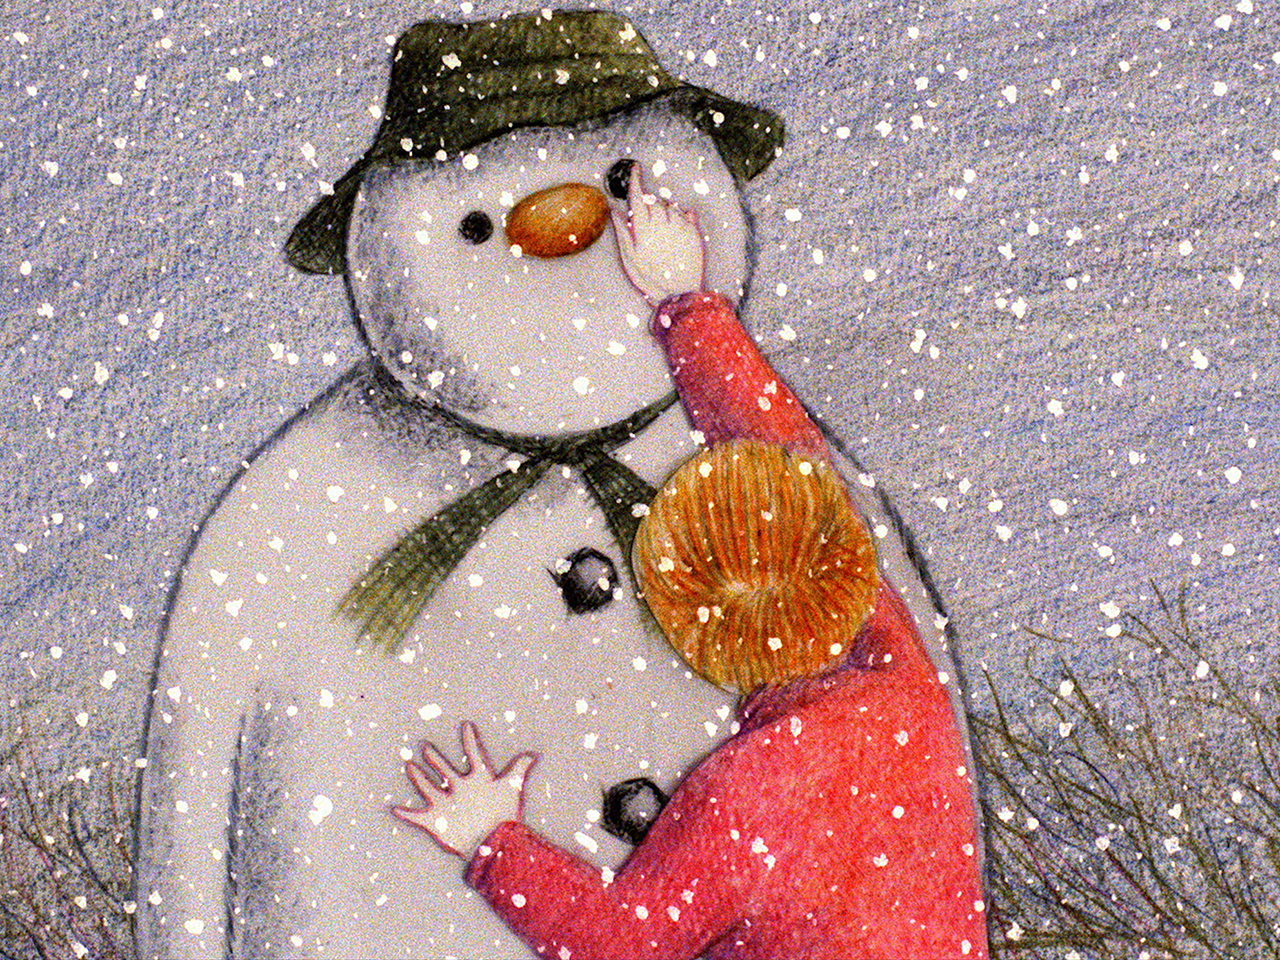 An image of the boy building the Snowman from the film The Snowman